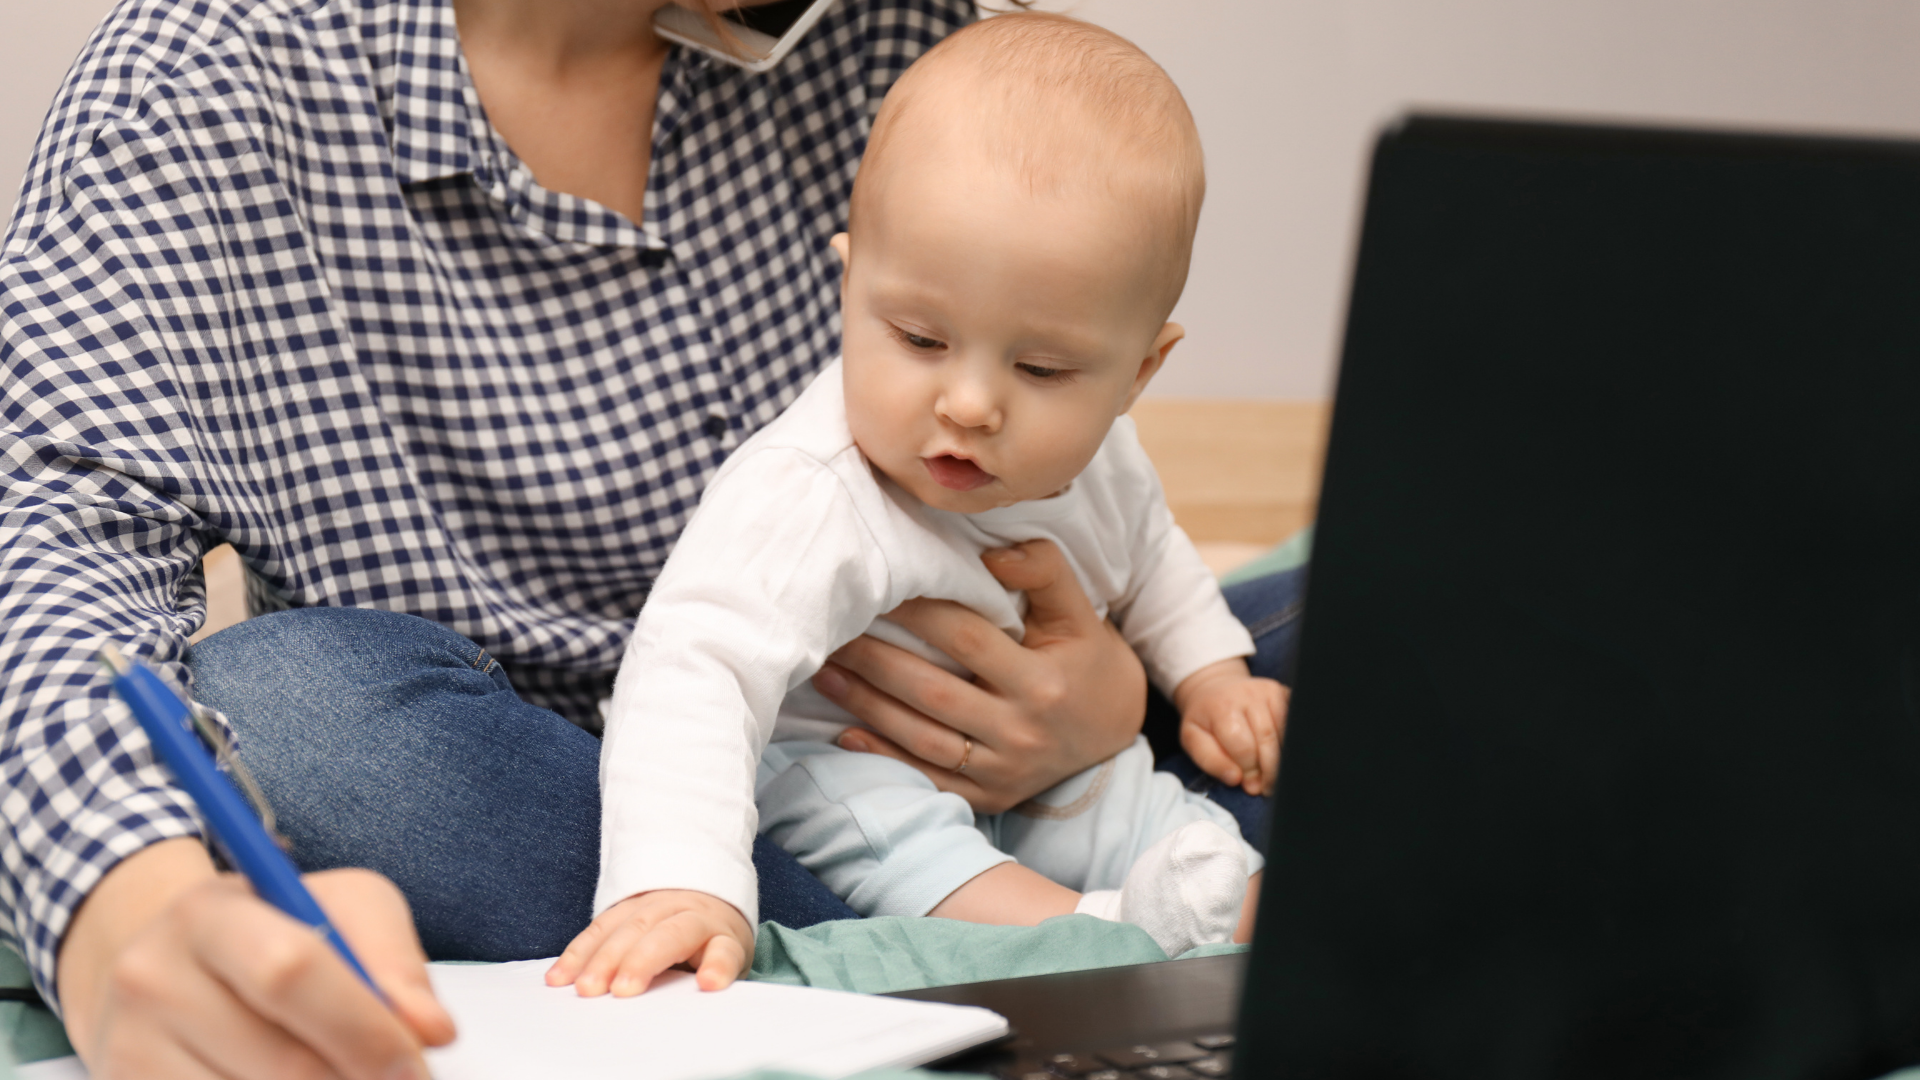 Q&A: Should babies be permitted in the workplace?